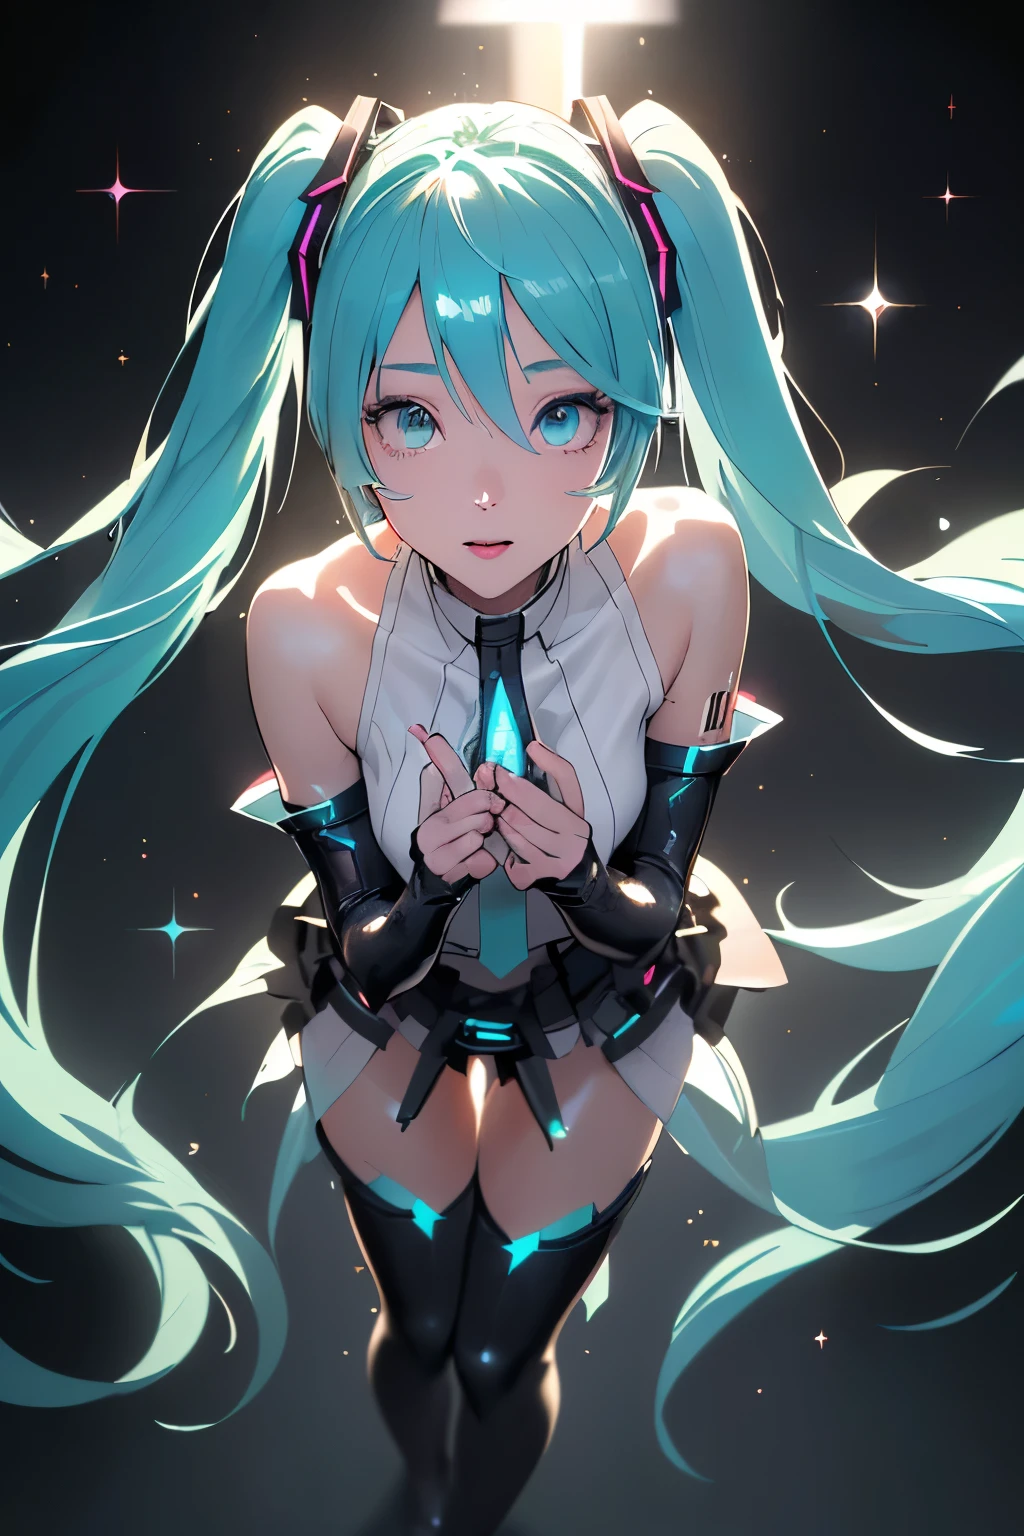 (((1girl))), (((Waifu, VOCALOID, Miku Hatsune Waifu))), (((Long Hair, Twintails Hair))), ((Cyan Eyes eyes:1.3, Upturned Eyes: 1, Perfect Eyes, Beautiful Detailed Eyes, Gradient eyes: 1, Finely Detailed Beautiful Eyes: 1, Symmetrical Eyes: 1, Big Highlight On Eyes: 1.2)), (((Lustrous Skin: 1.5, Bright Skin: 1.5, Skin Fair, Shiny Skin, Very Shiny Skin, Shiny Body, Plastic Glitter Skin, Exaggerated Shiny Skin, Illuminated Skin))), (Detailed Body, (Detailed Face)), (Best Quality), Shirt, Loose Skirt, Garter Belt, Stockings, High Resolution, Sharp Focus, Ultra Detailed, Extremely Detailed, Extremely High Quality Artwork, (Realistic, Photorealistic: 1.37), 8k_Wallpaper, (Extremely Detailed CG 8k), (Very Fine 8K CG), ((Hyper Super Ultra Detailed Perfect Piece)), (((Flawlessmasterpiece))), Illustration, Vibrant Colors, (Intricate), High Contrast, Selective Lighting, Double Exposure, HDR (High Dynamic Range), Post-processing, Background Blur, Inky Shadows, Darker Shadows, Thick Shadows, High Quality Shadows, high detail, realistic, Cinematic Light, sidelighting, Lens Flare, Ray tracing, sharp focus,